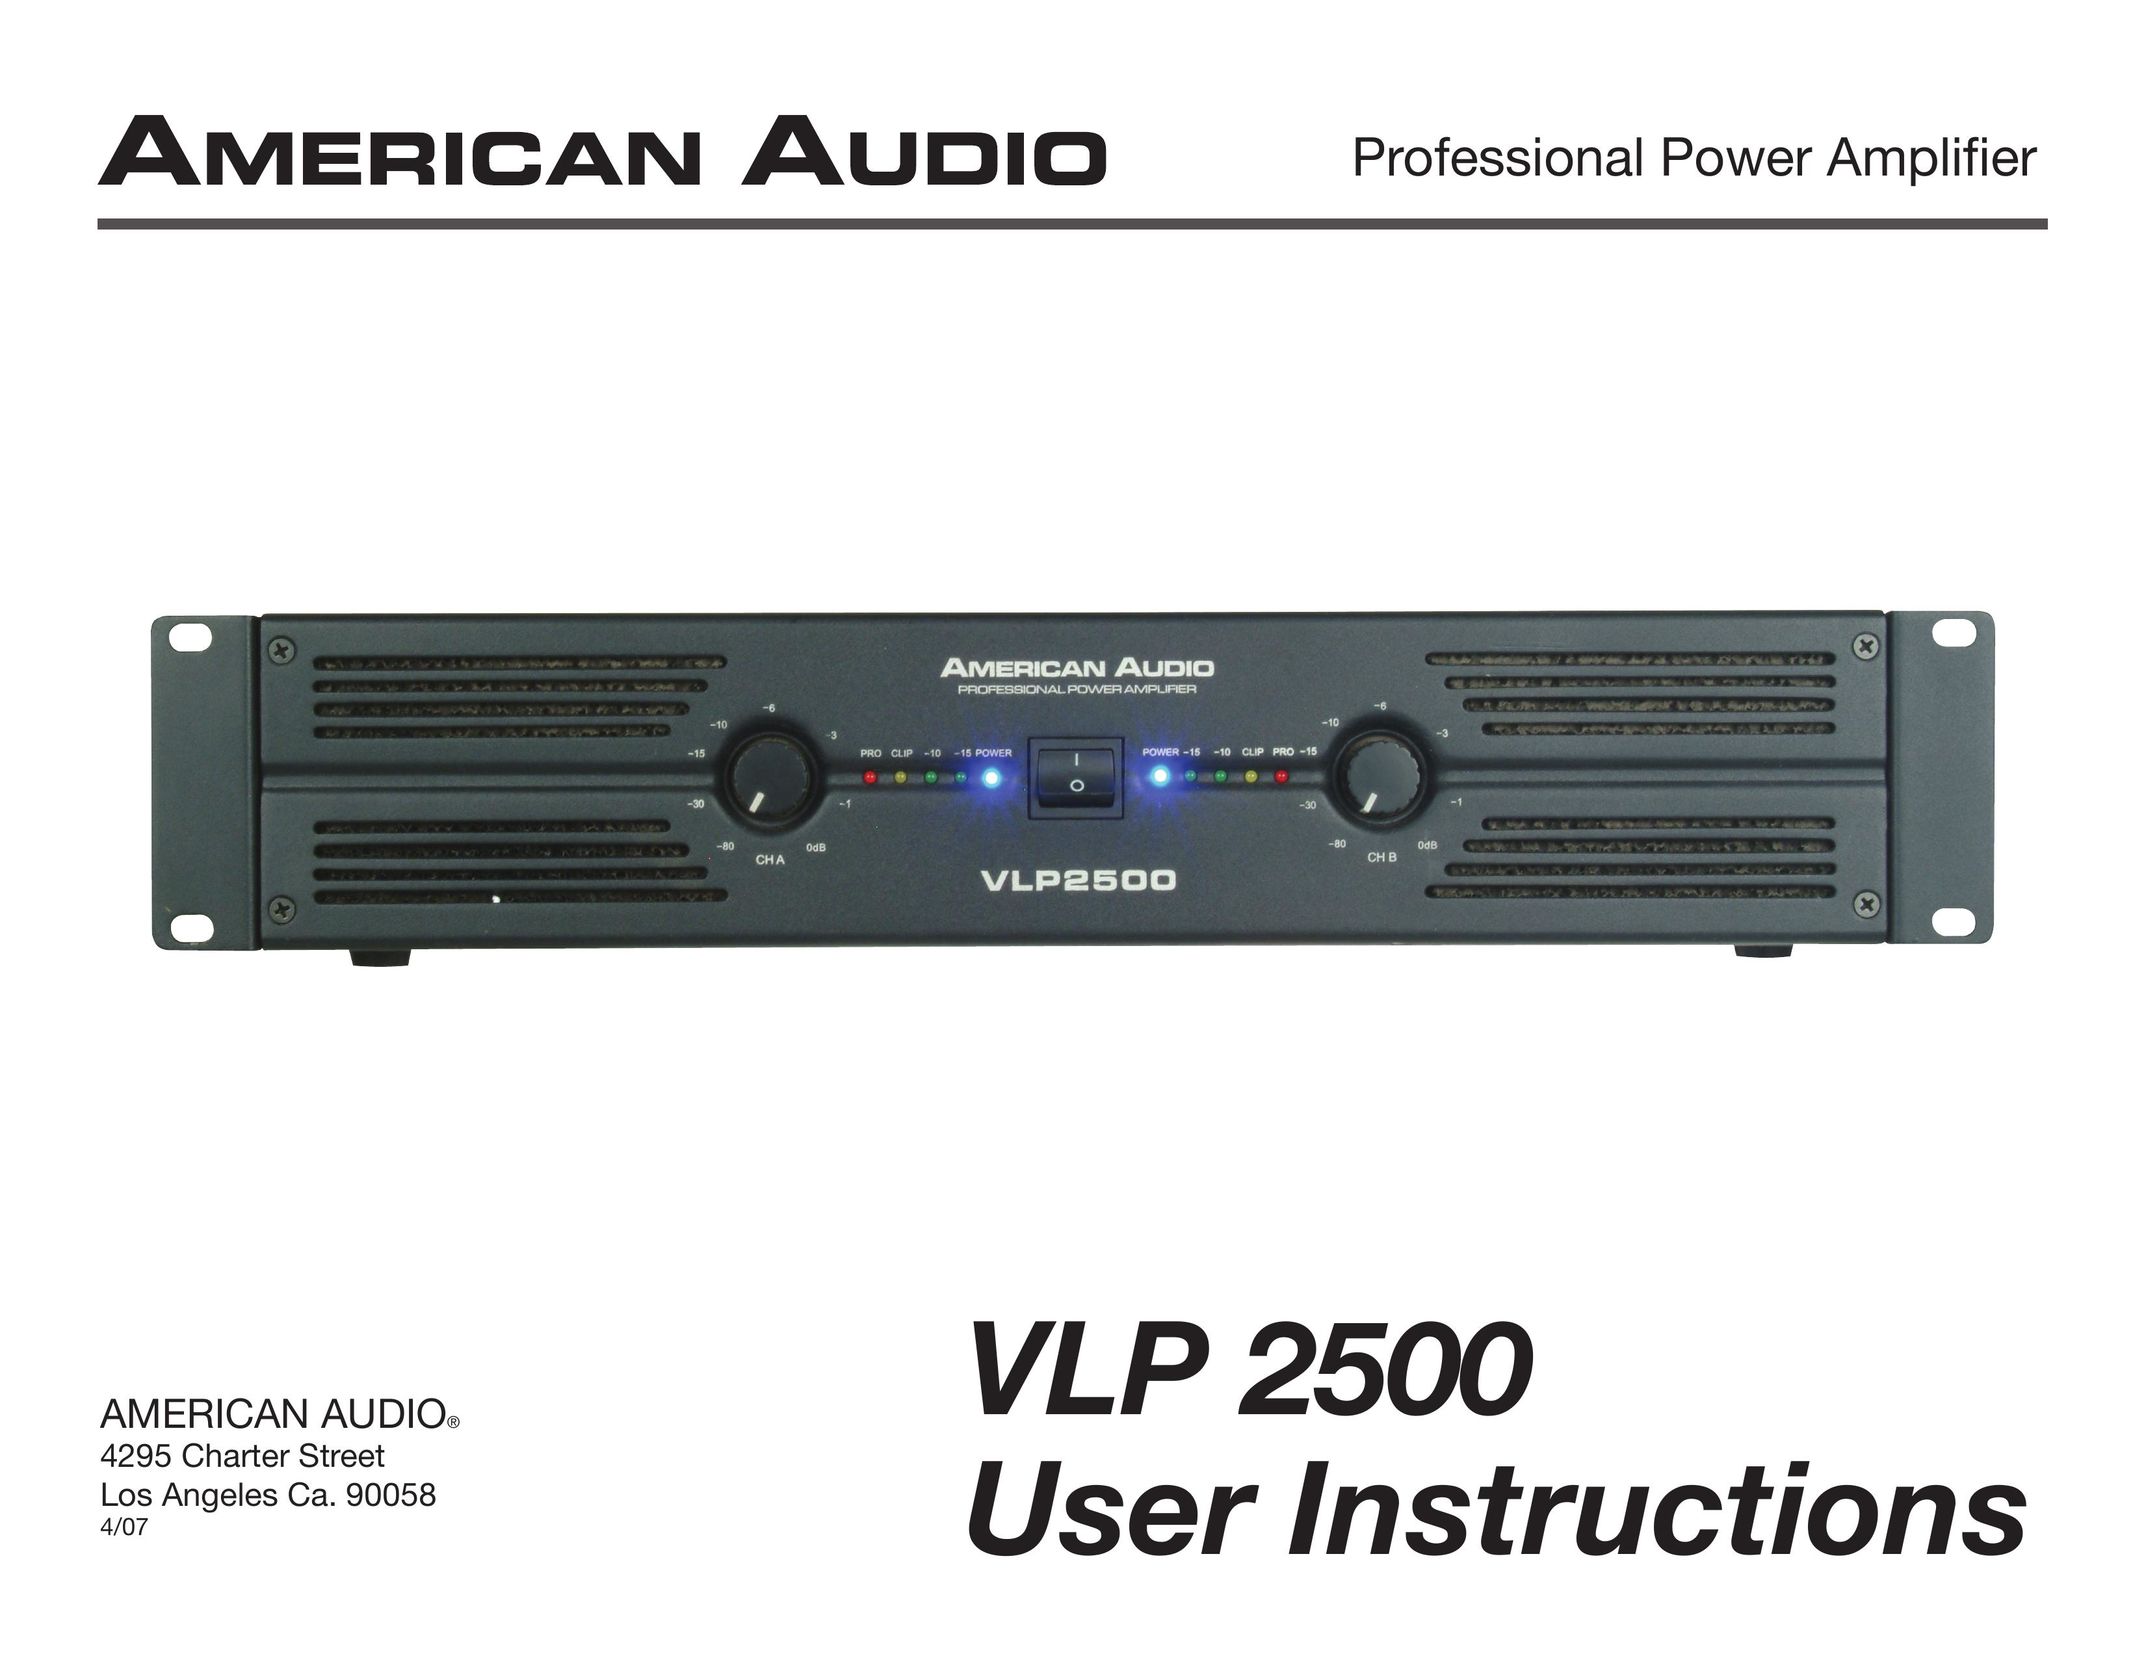 American Audio Professional Power Amplifier Stereo Amplifier User Manual